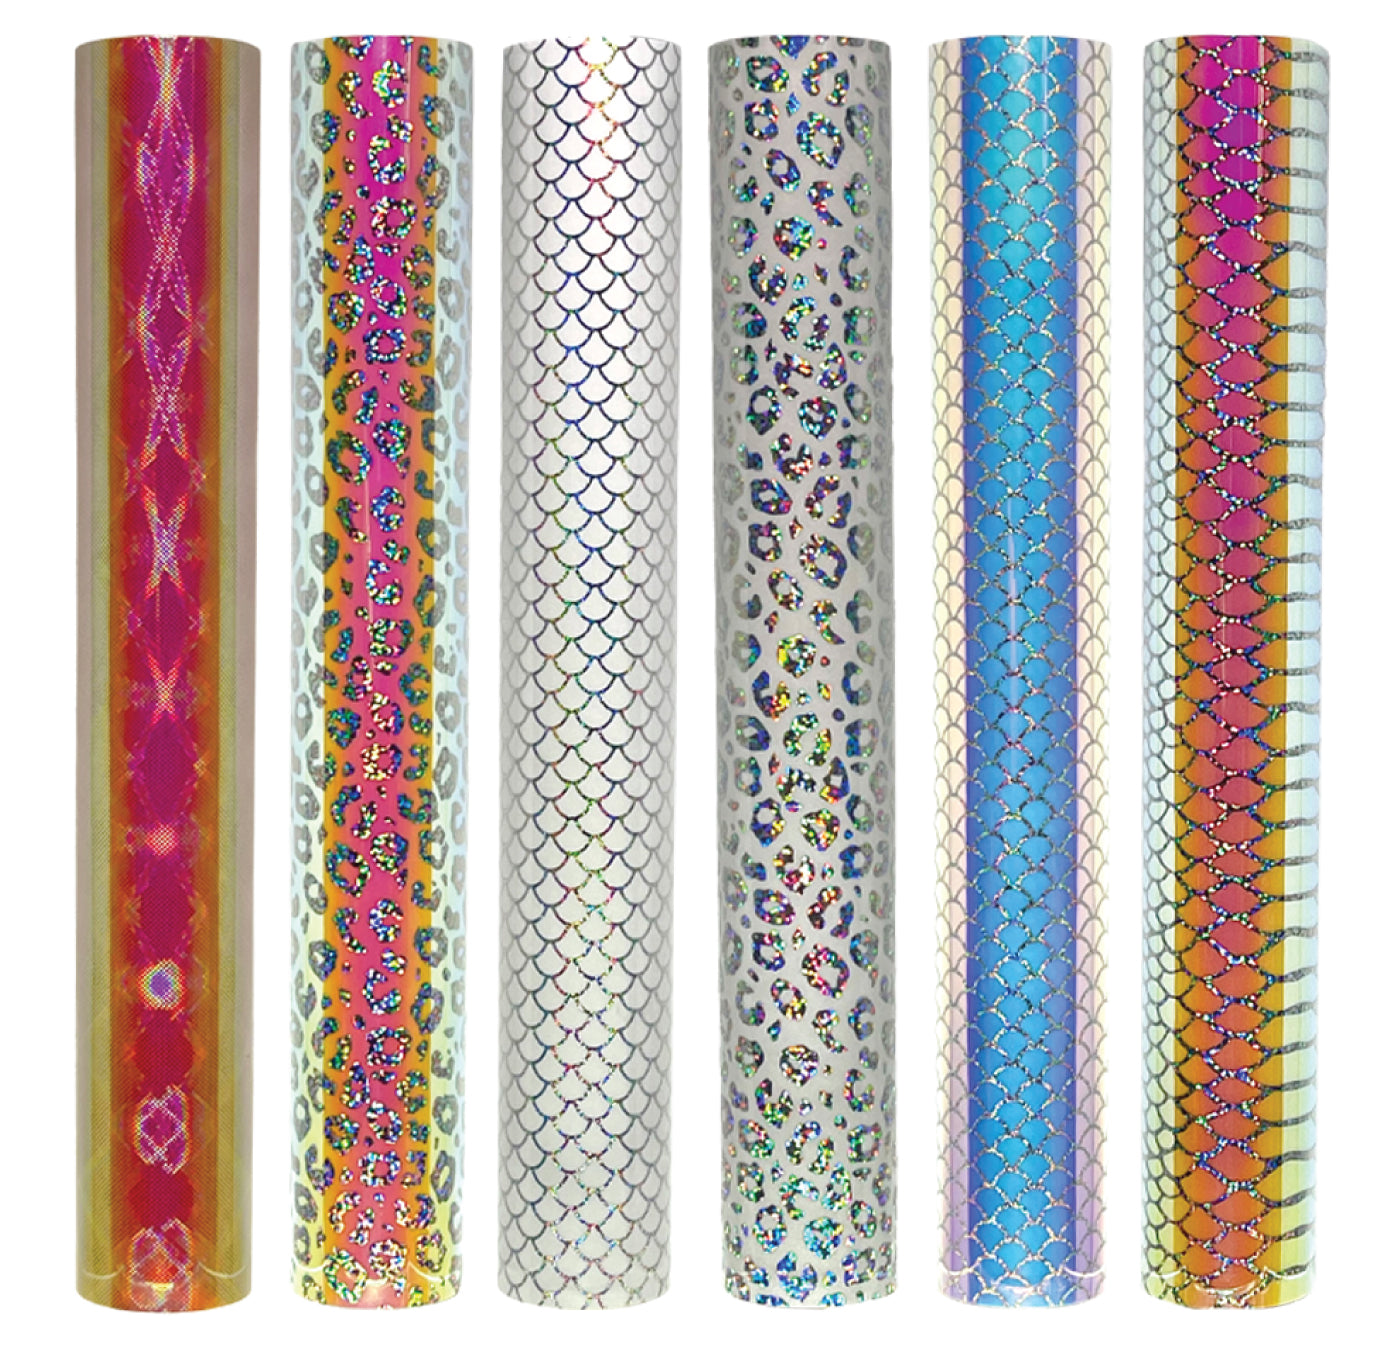 White Leopard Pattern Holographic Adhesive Vinyl Rolls By Craftables